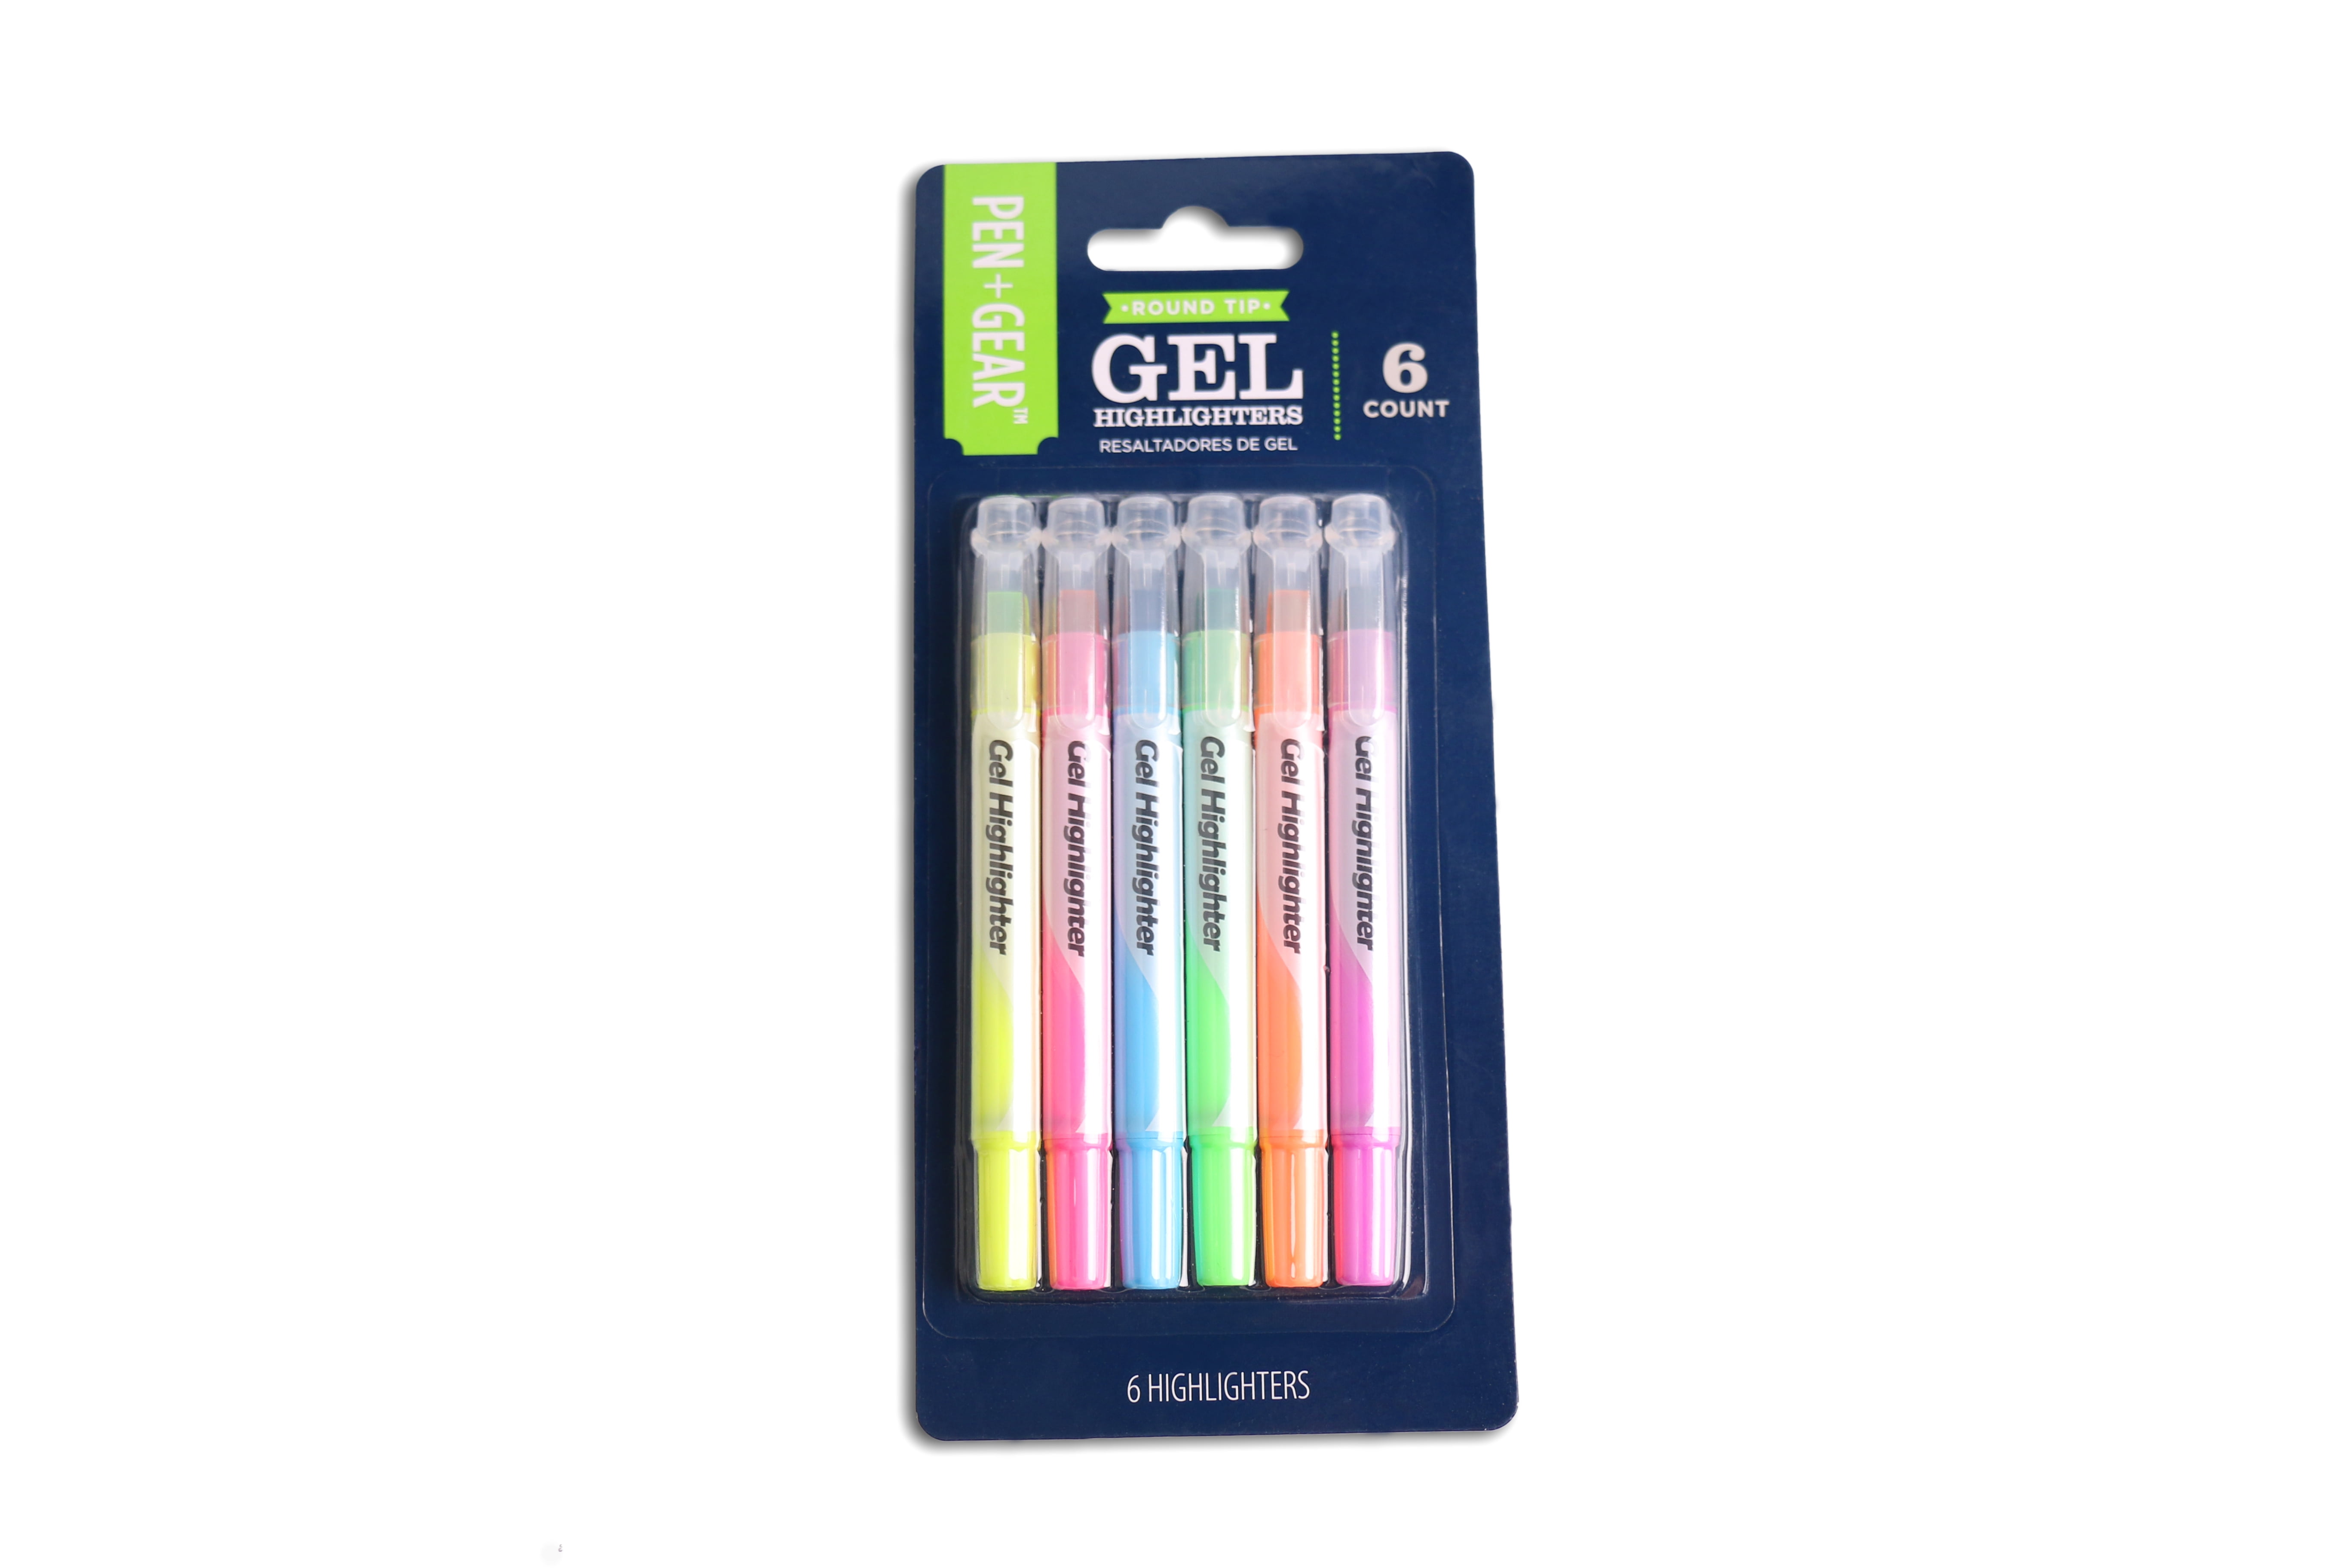 6 No Bleed or Smear Bible Safe Gel Highlighters, Bible Journaling Inductive  Study Kit Markers, Highlighters, Pens, Korean Stationary 